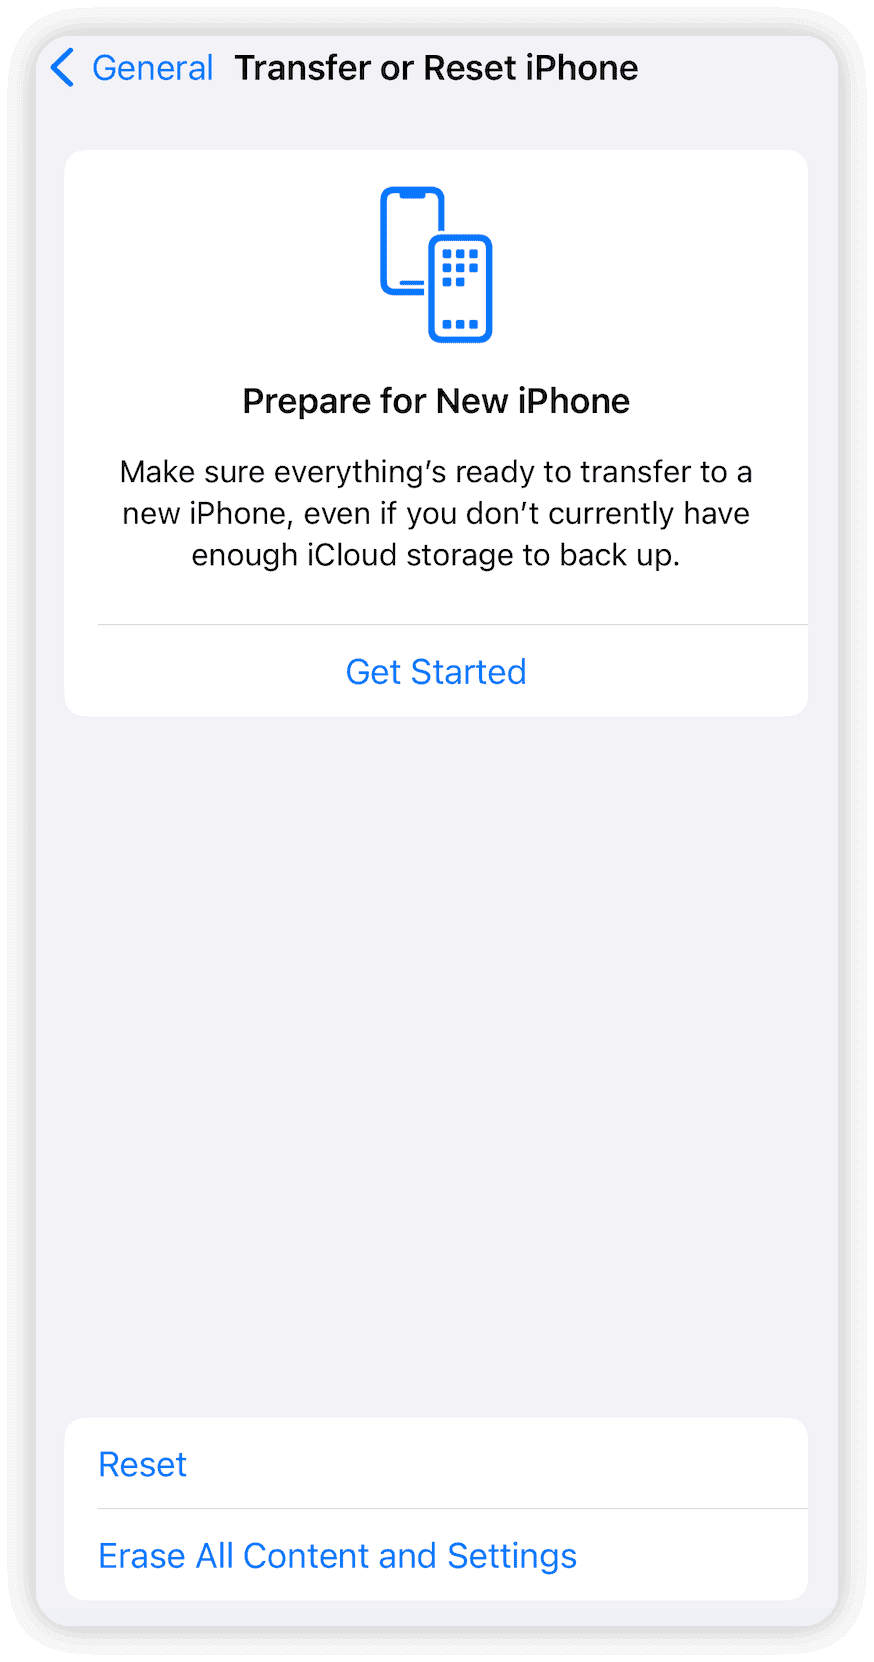 Erase all content and settings of iPhone